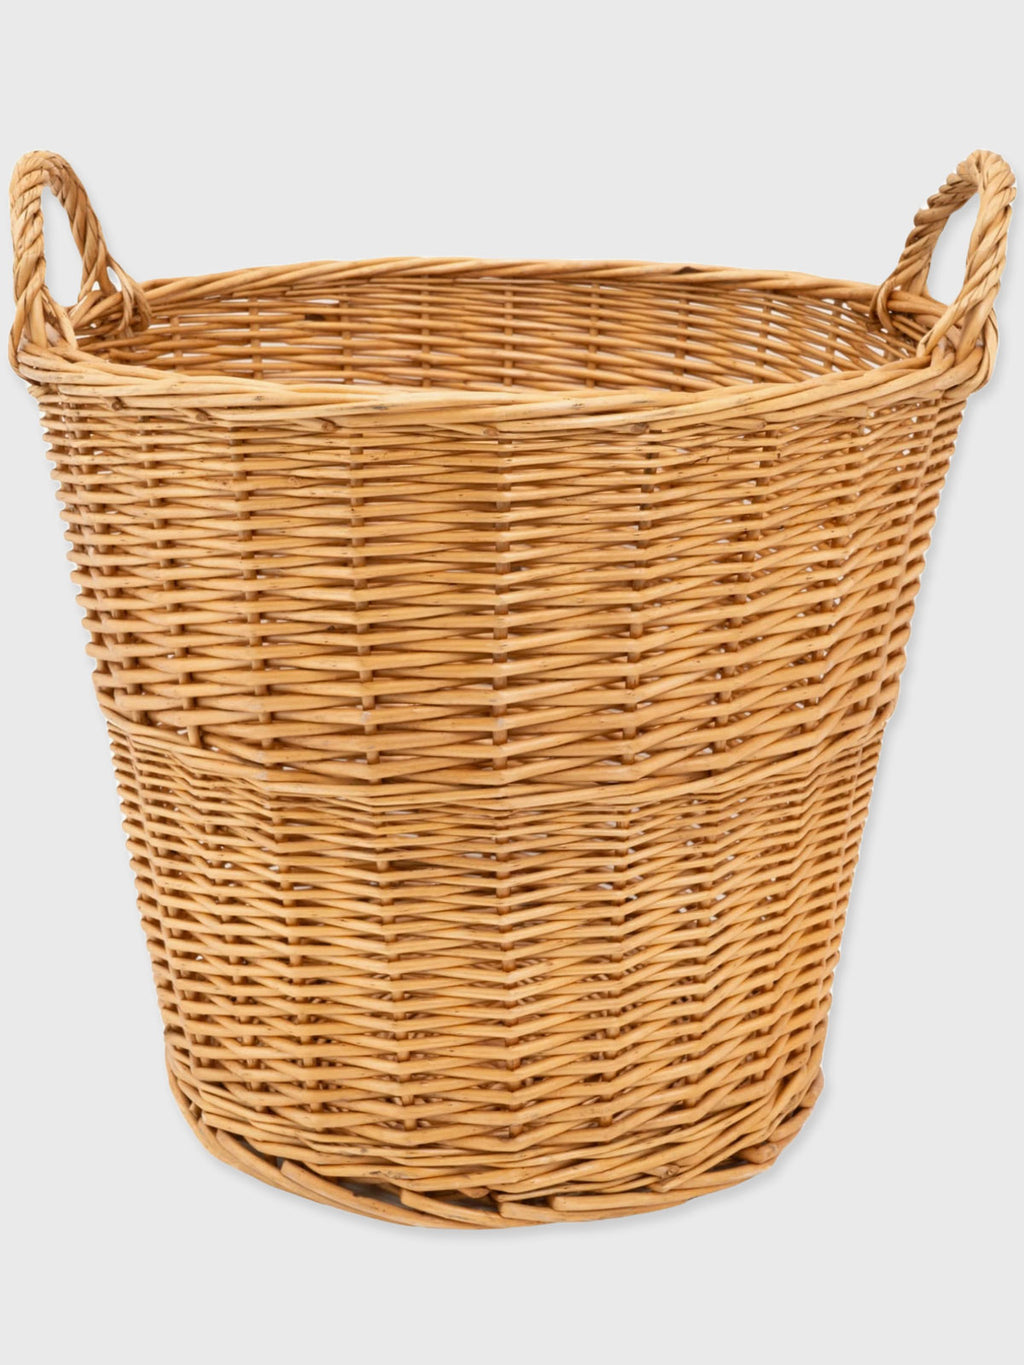 Large Wicker Basket with Handles